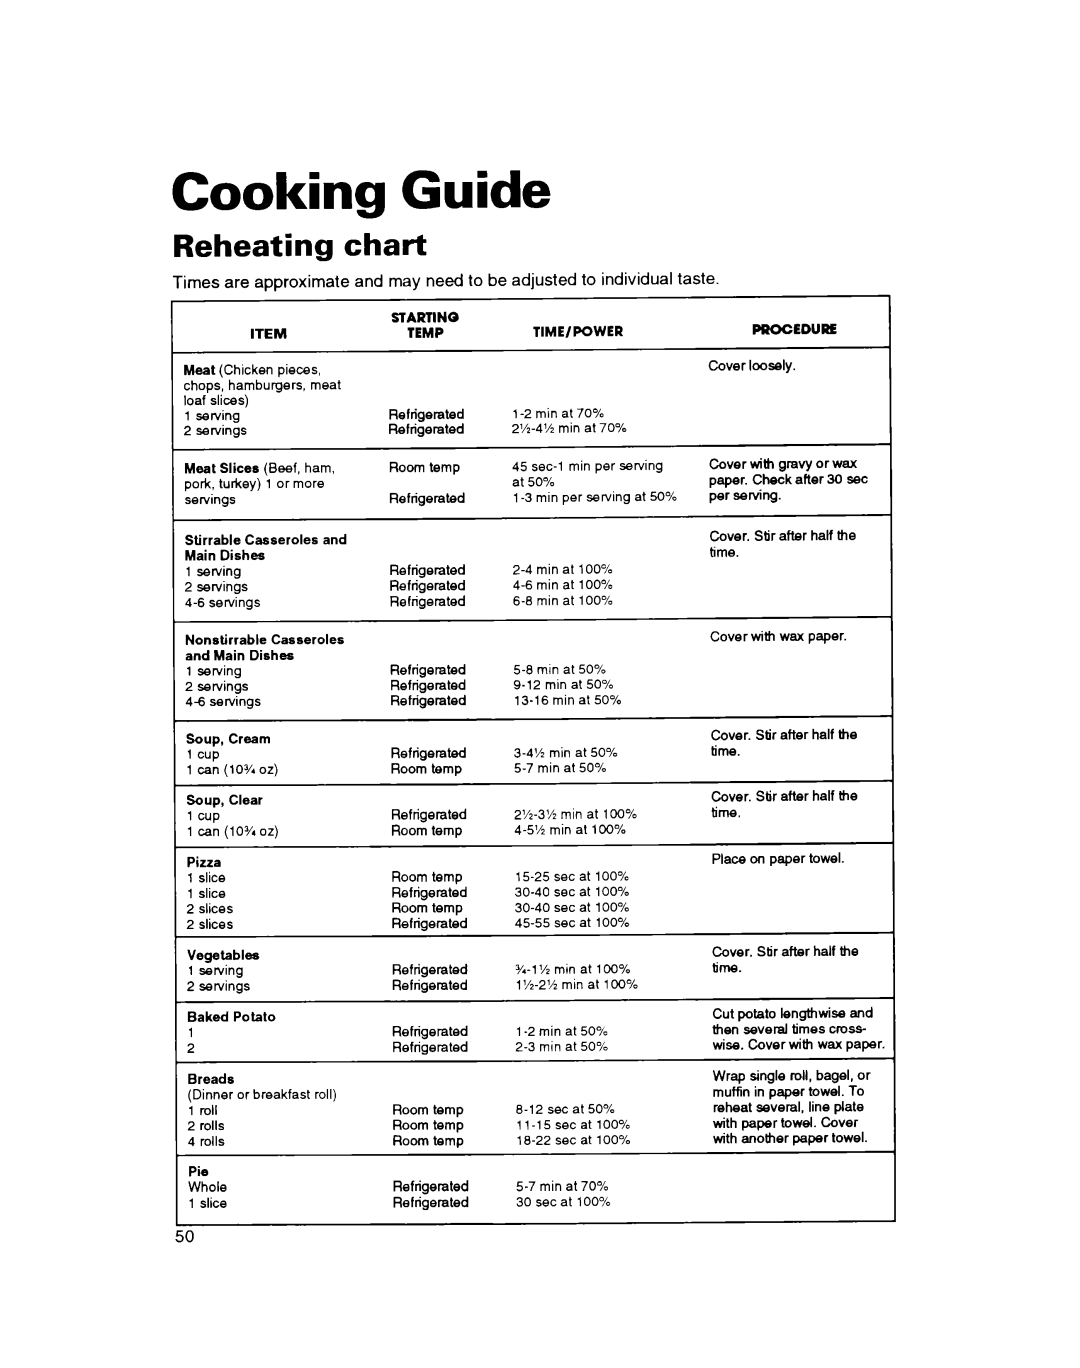 Whirlpool MH7110XB warranty Cooking Guide, Reheating chart 